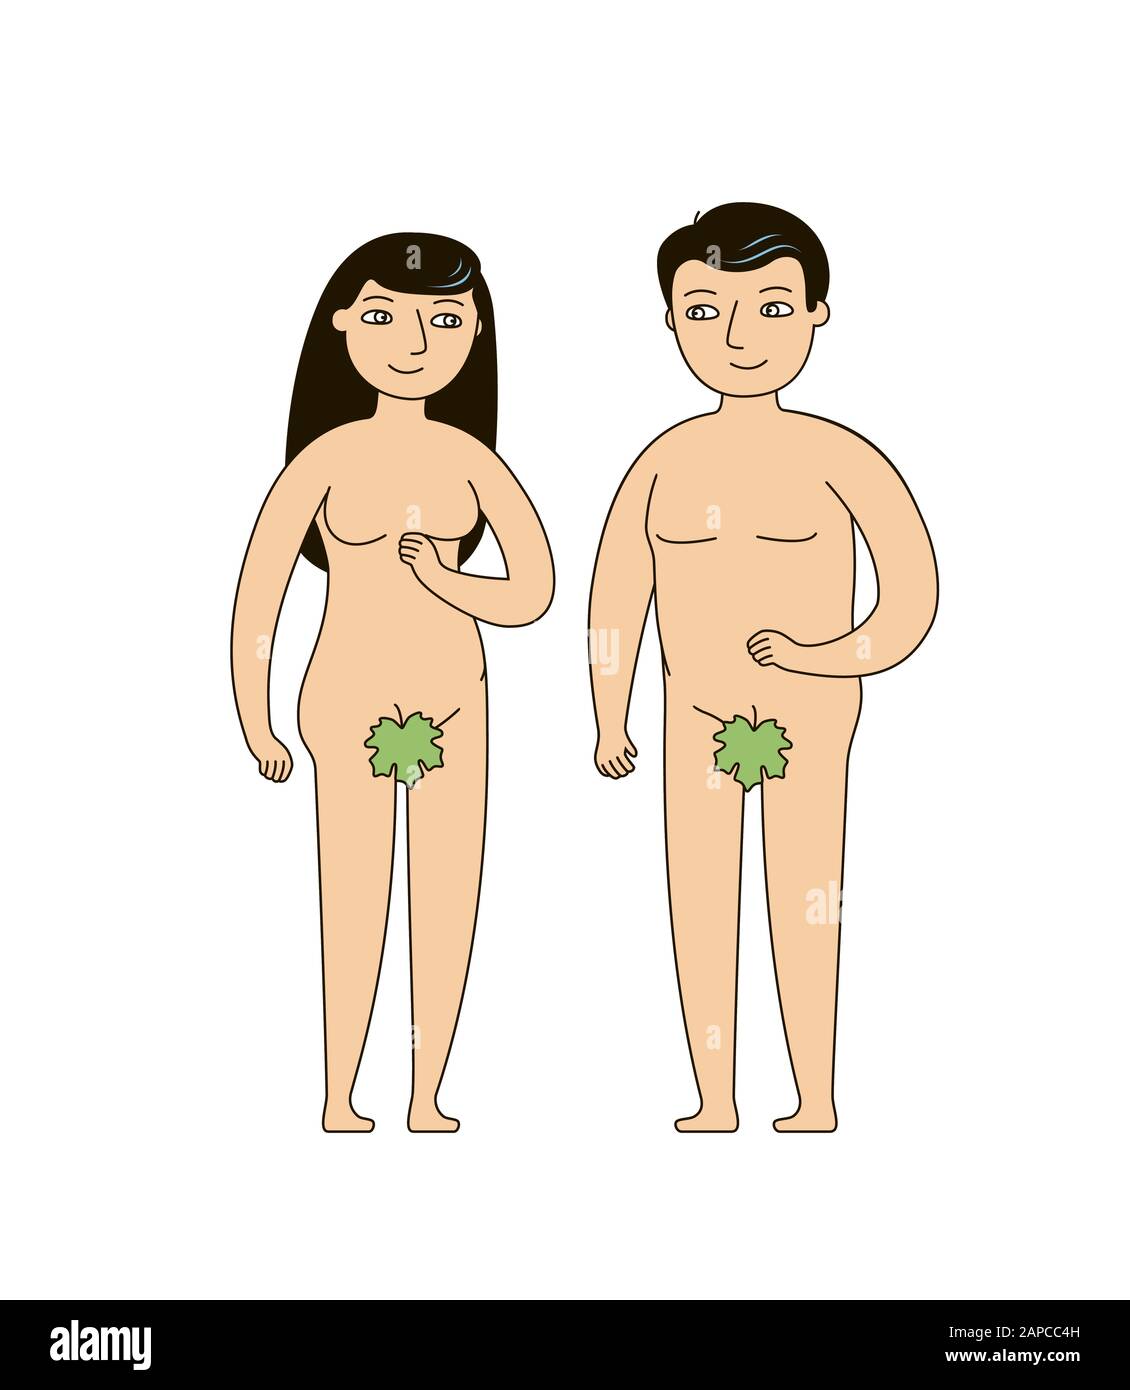 Adam and eve Cut Out Stock Images & Pictures - Alamy